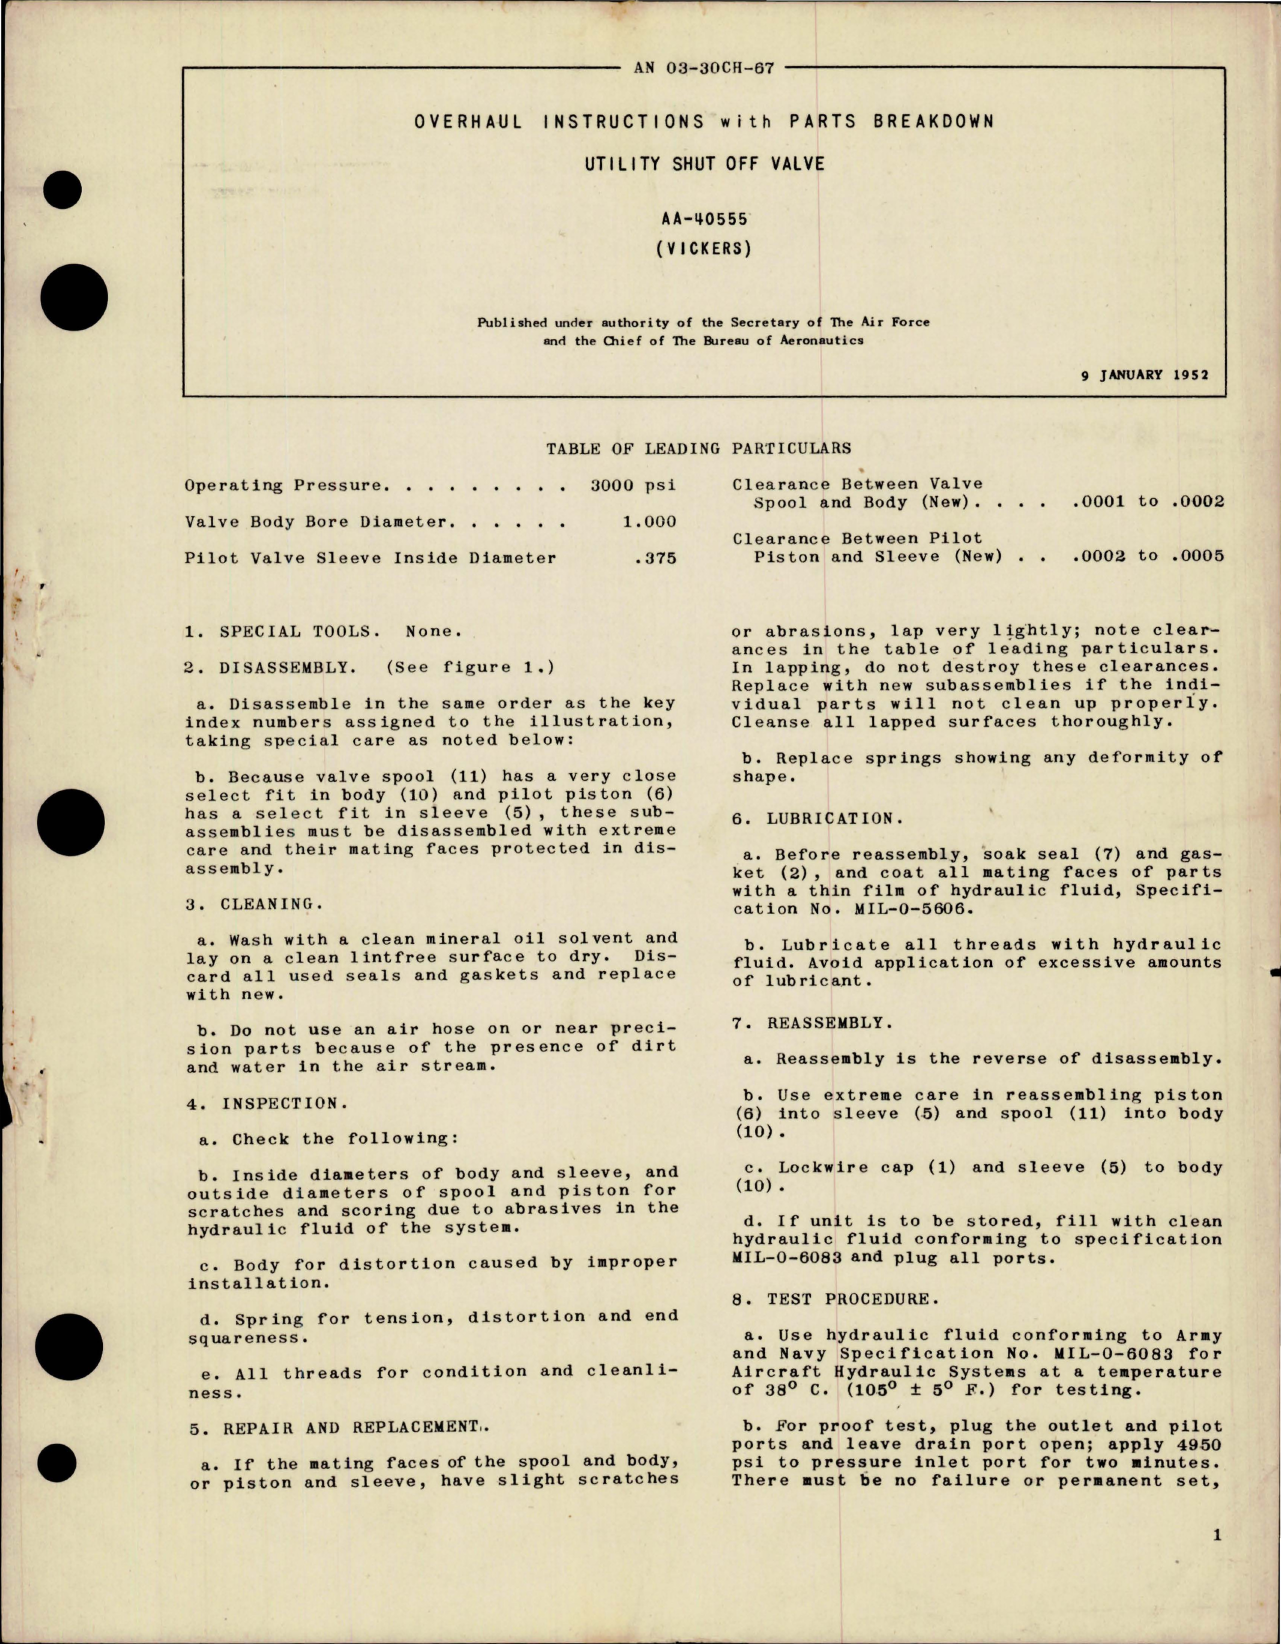 Sample page 1 from AirCorps Library document: Overhaul Instructions with Parts Breakdown for Utility Shut Off Valve - AA-40555